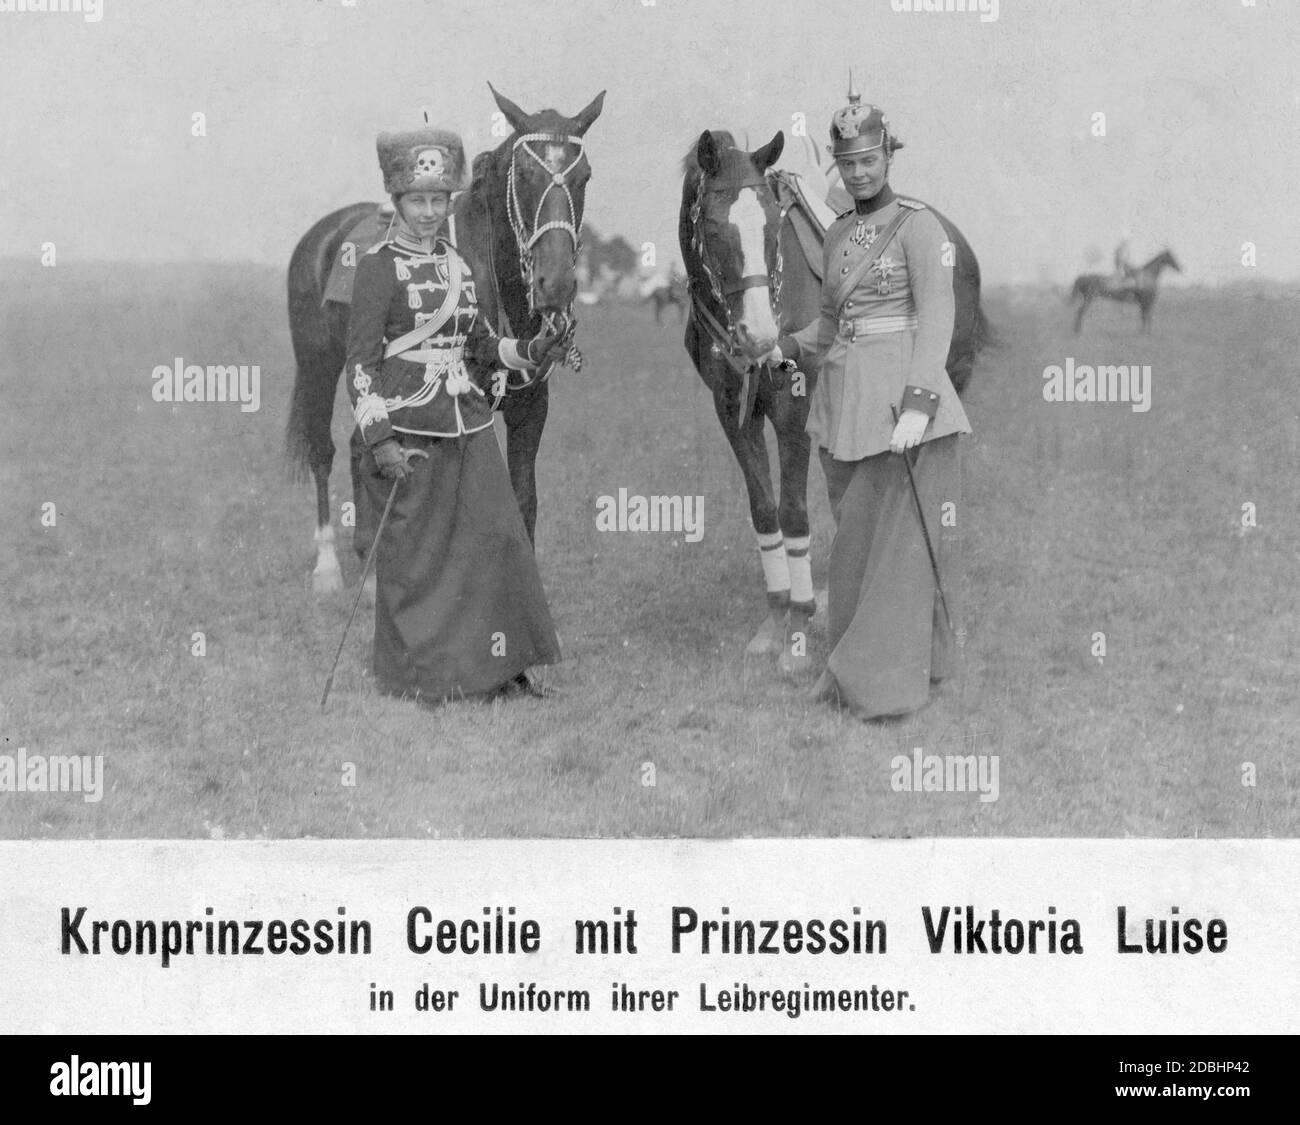 'Princess Viktoria Louise of Prussia (left) and Crown Princess Cecilie of Mecklenburg (right) wear the uniforms of their Lifeguards Regiments. Both women were heads of regiments, Viktoria Louise was head of the 2. Leib-Husaren-Regiment ''Koenigin Viktoria von Preussen'' Nr. 2 and Cecilie was head of the Dragoner-Regiment Koenig Friedrich III. (2. Schlesisches) Nr. 8. Photo from the year 1912.' Stock Photo